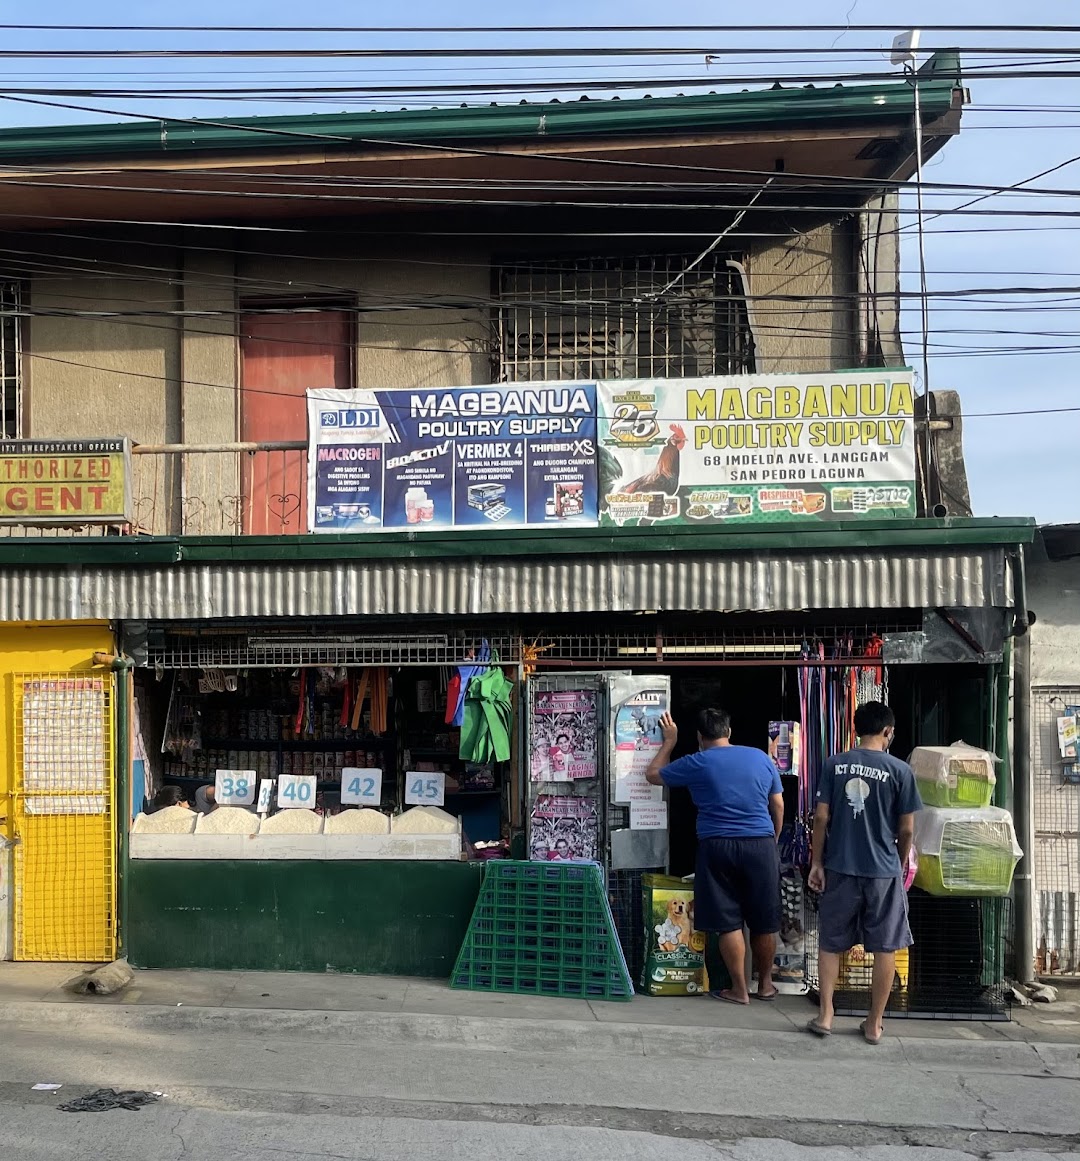 Magbanua Pet and Poultry Supply